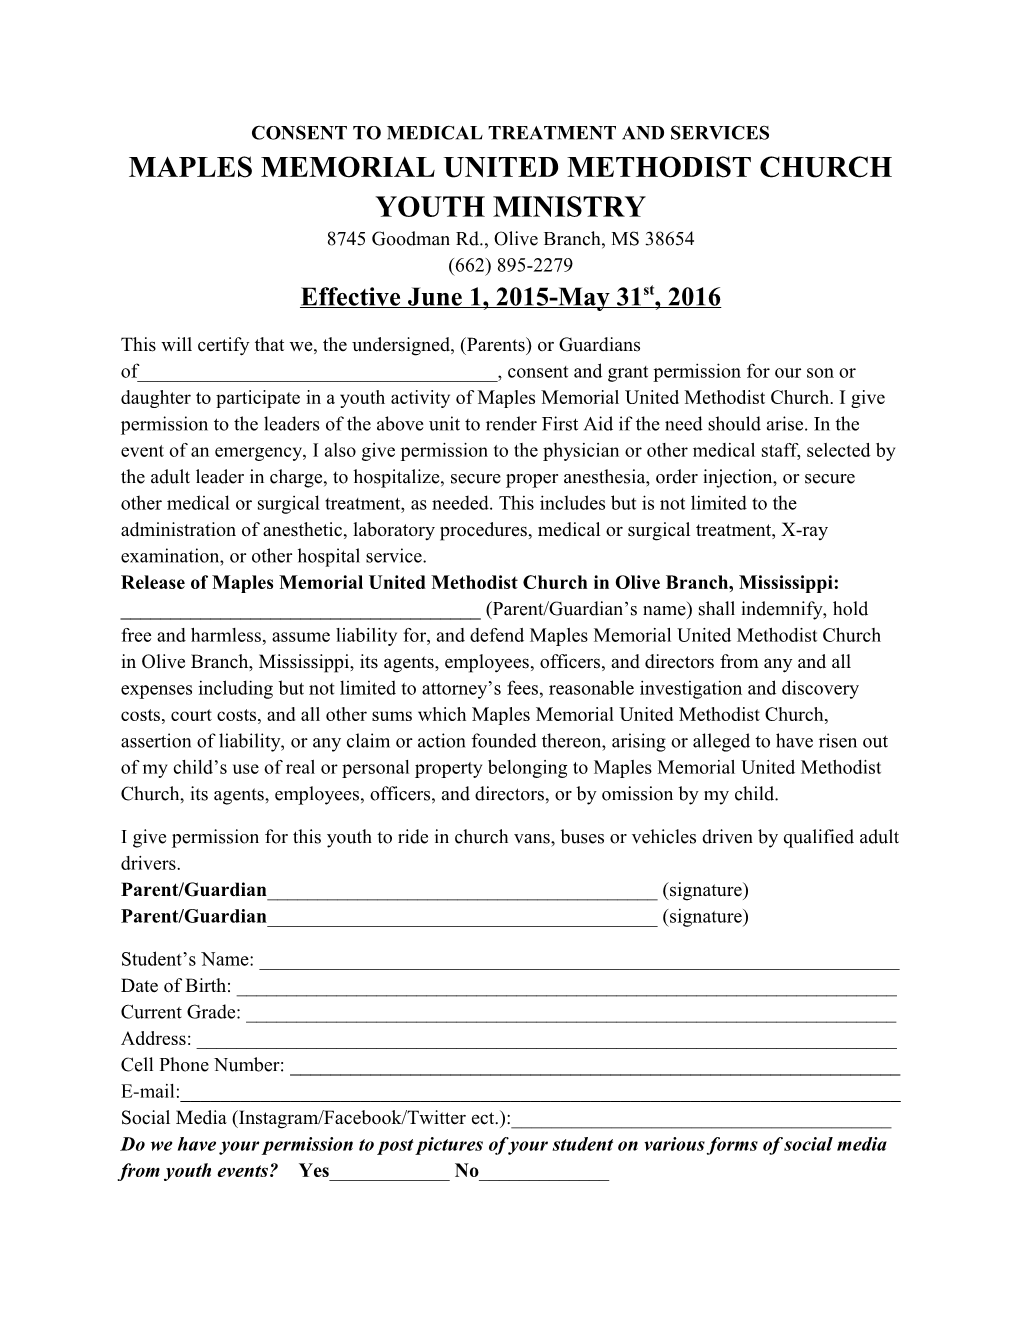 Consent to Medical Treatment and Services Maples Memorial United Methodist Church Youth